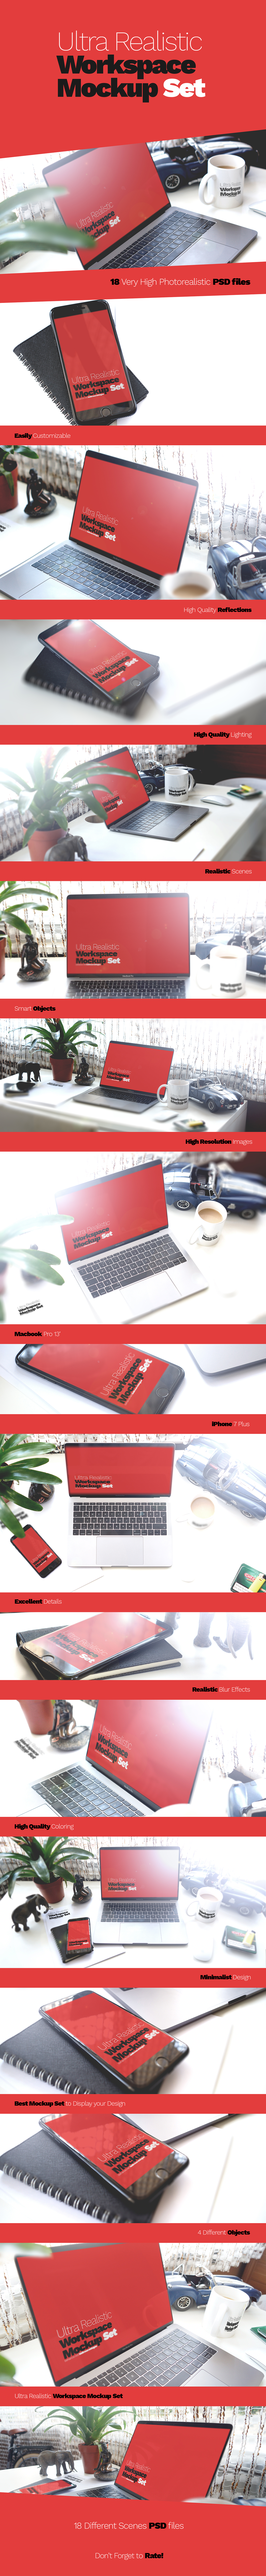 Mockup apple macbook corporate iphone identity cup Coffee device graphic